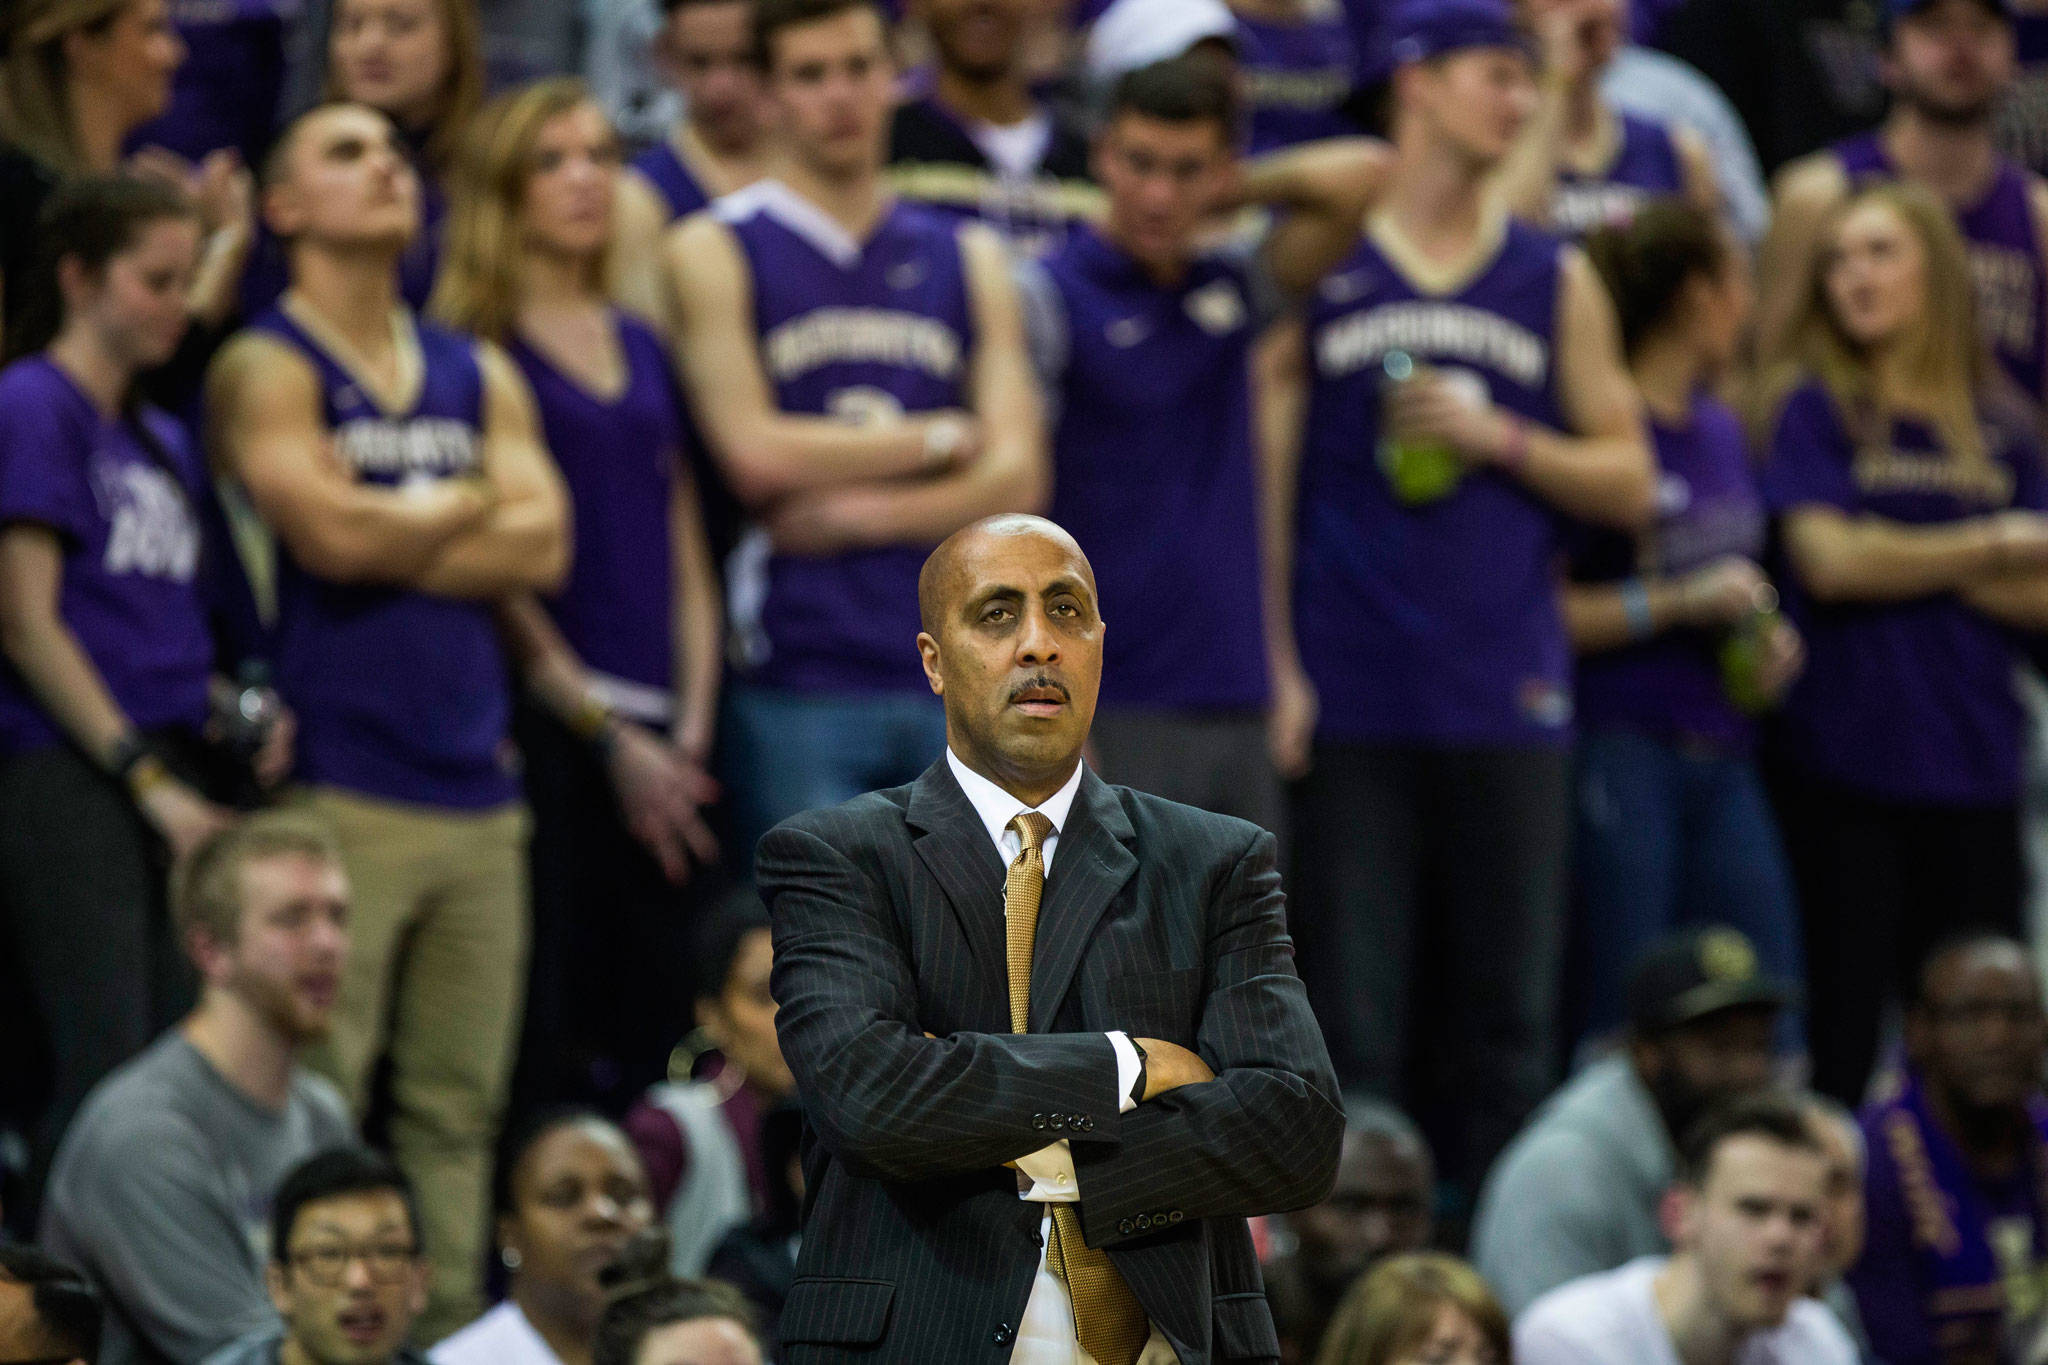 (Dean Rutz | Seattle Times) Washington head coach Lorenzo Romar, who has patrolled the sidelines for the Huskies for 15 seasons, was fired on Wednesday. The Huskies suffered their worst men’s basketball season in 23 years this season.